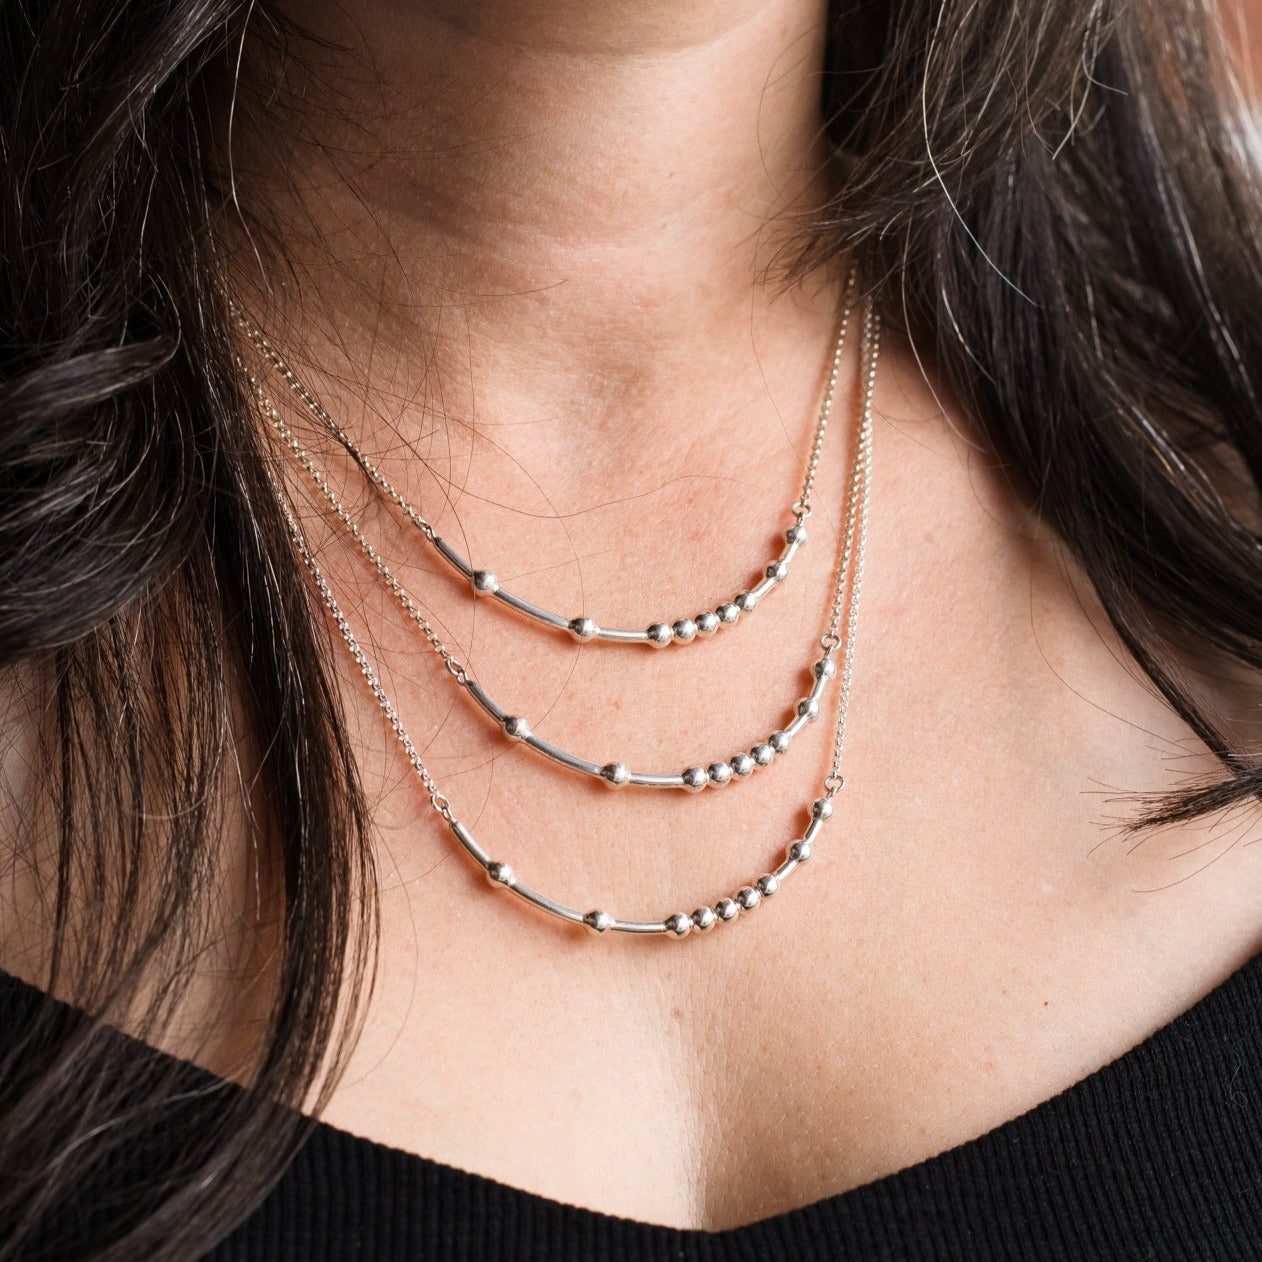 Women wearing a 16, 18 and 20 inch silver necklace to demonstrate different necklace lengths on the body 